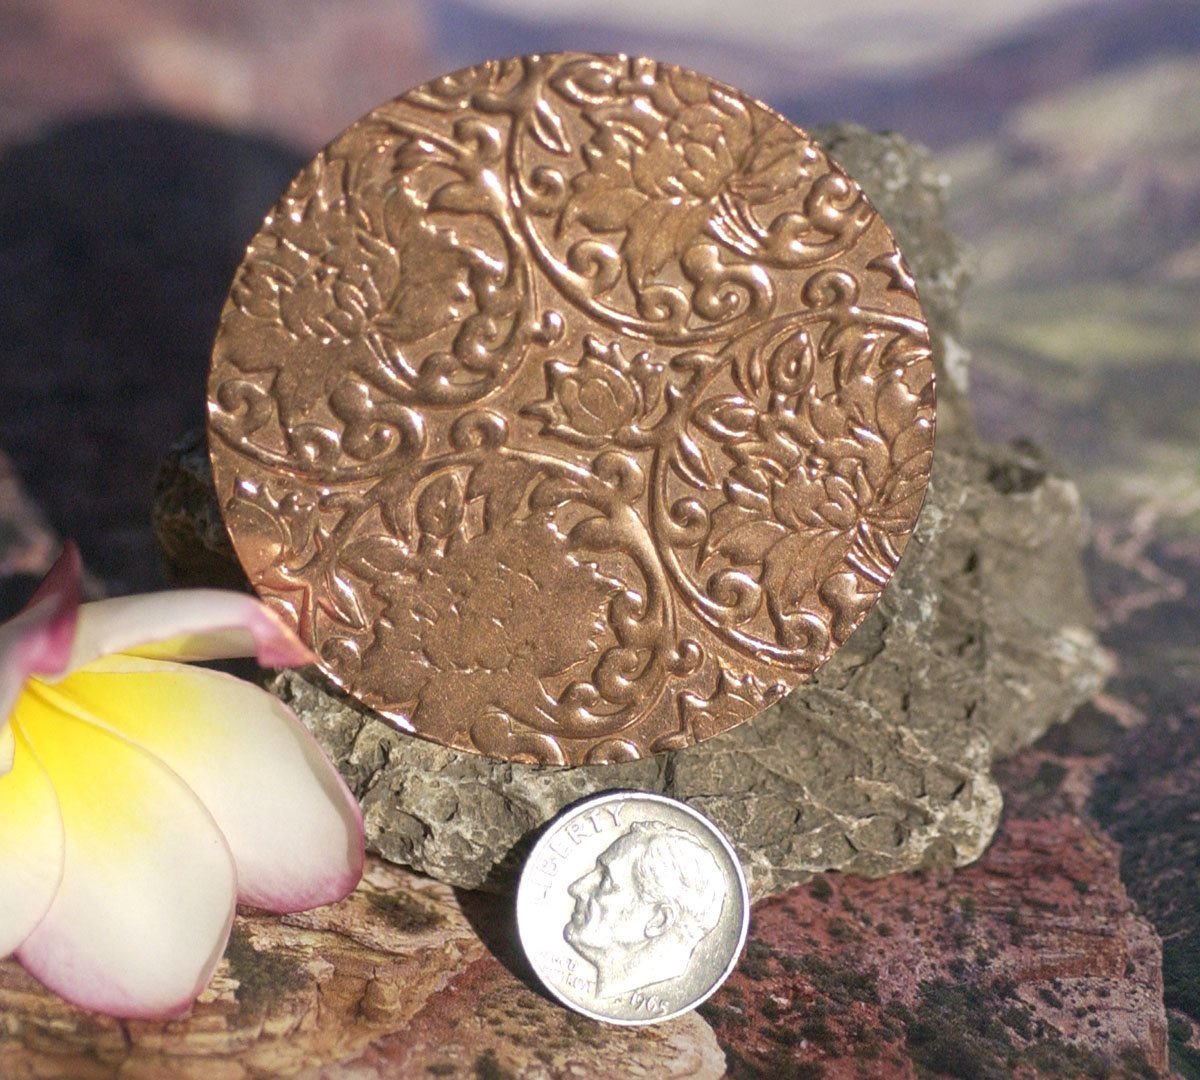 Patterned Copper Disc 55mm in Lotus Flowers Pattern 20G for Enameling Soldering Stamping, Jewelry Supplies - 2 Pieces